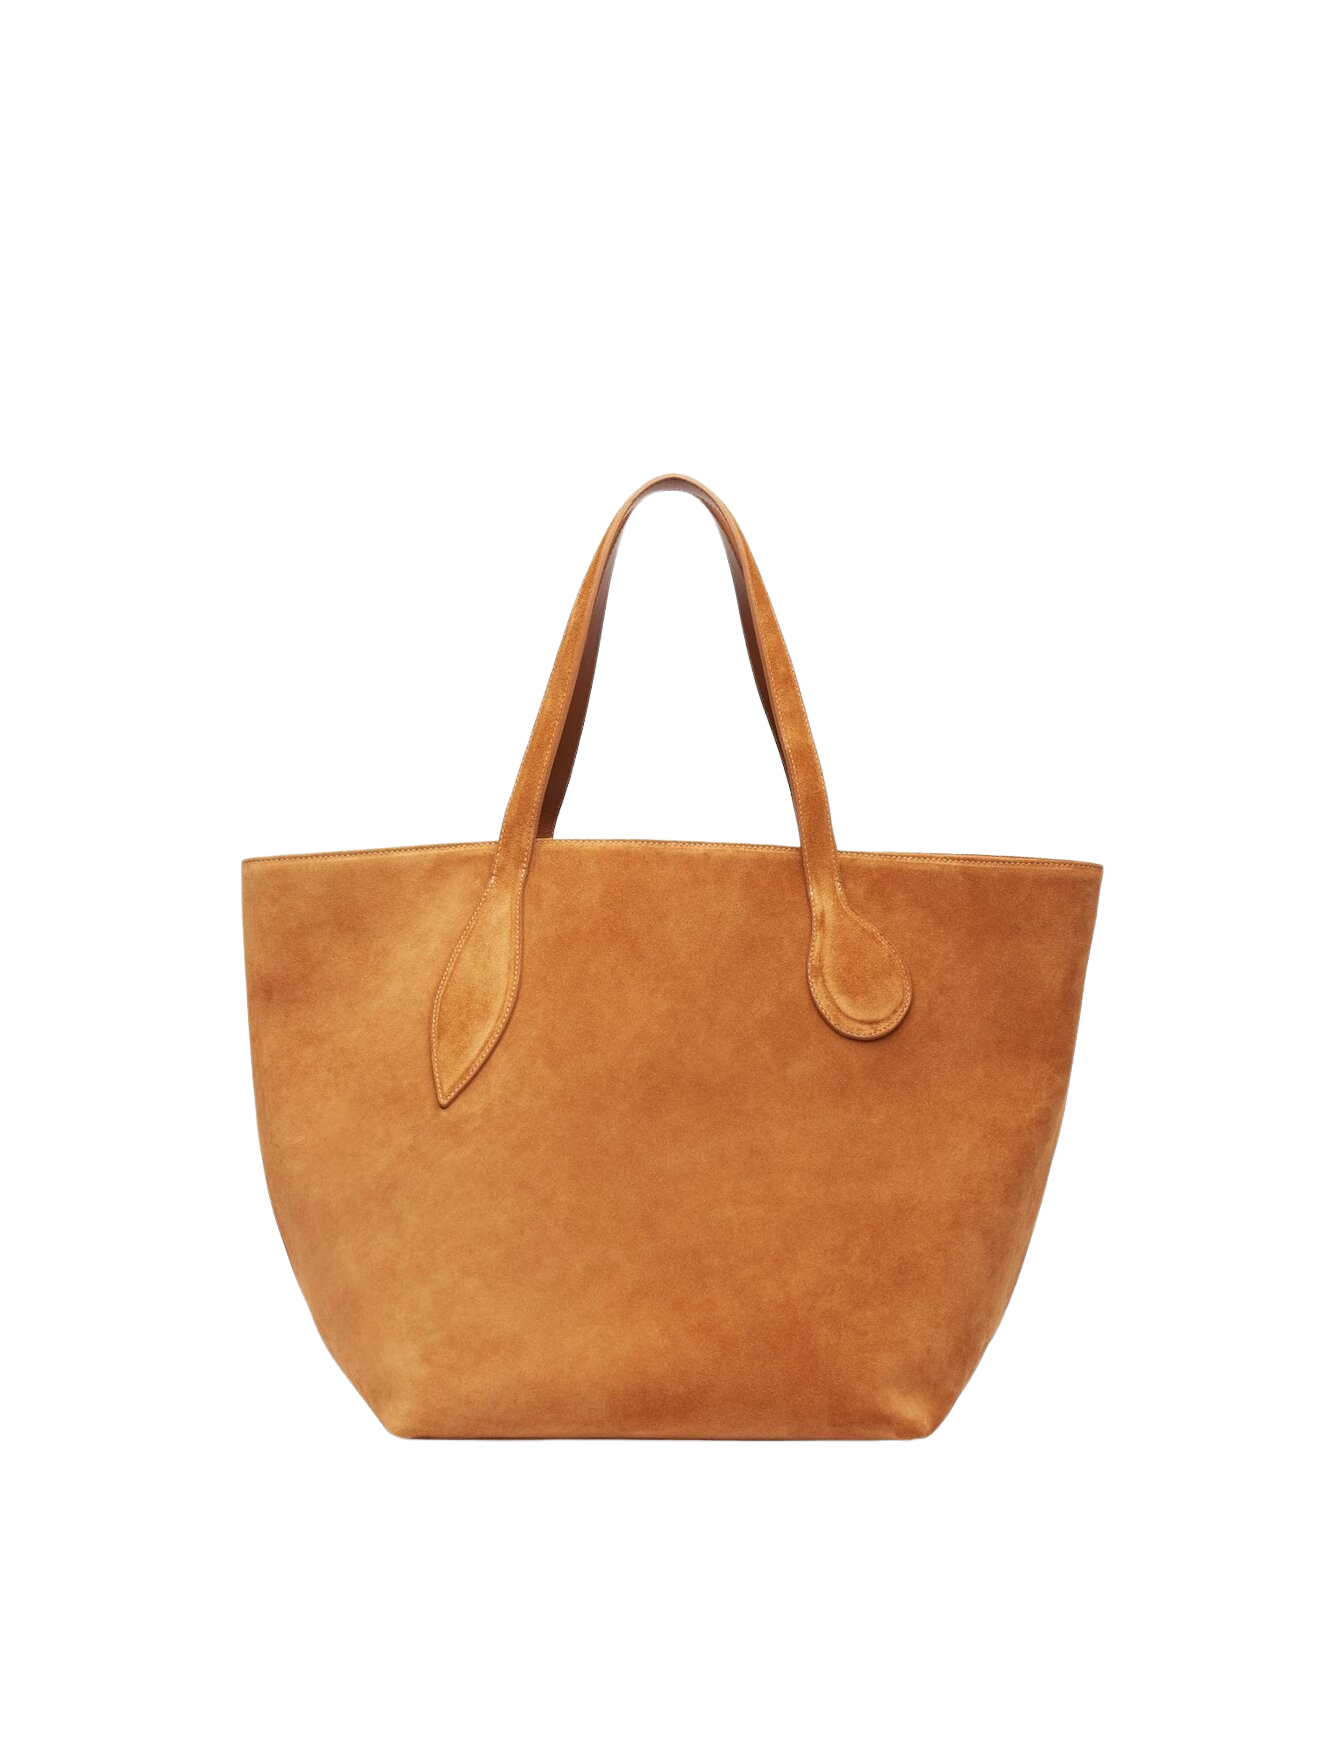 Real Suede Soft Tan Slouchy Style Bag Made in Italy Everyday 